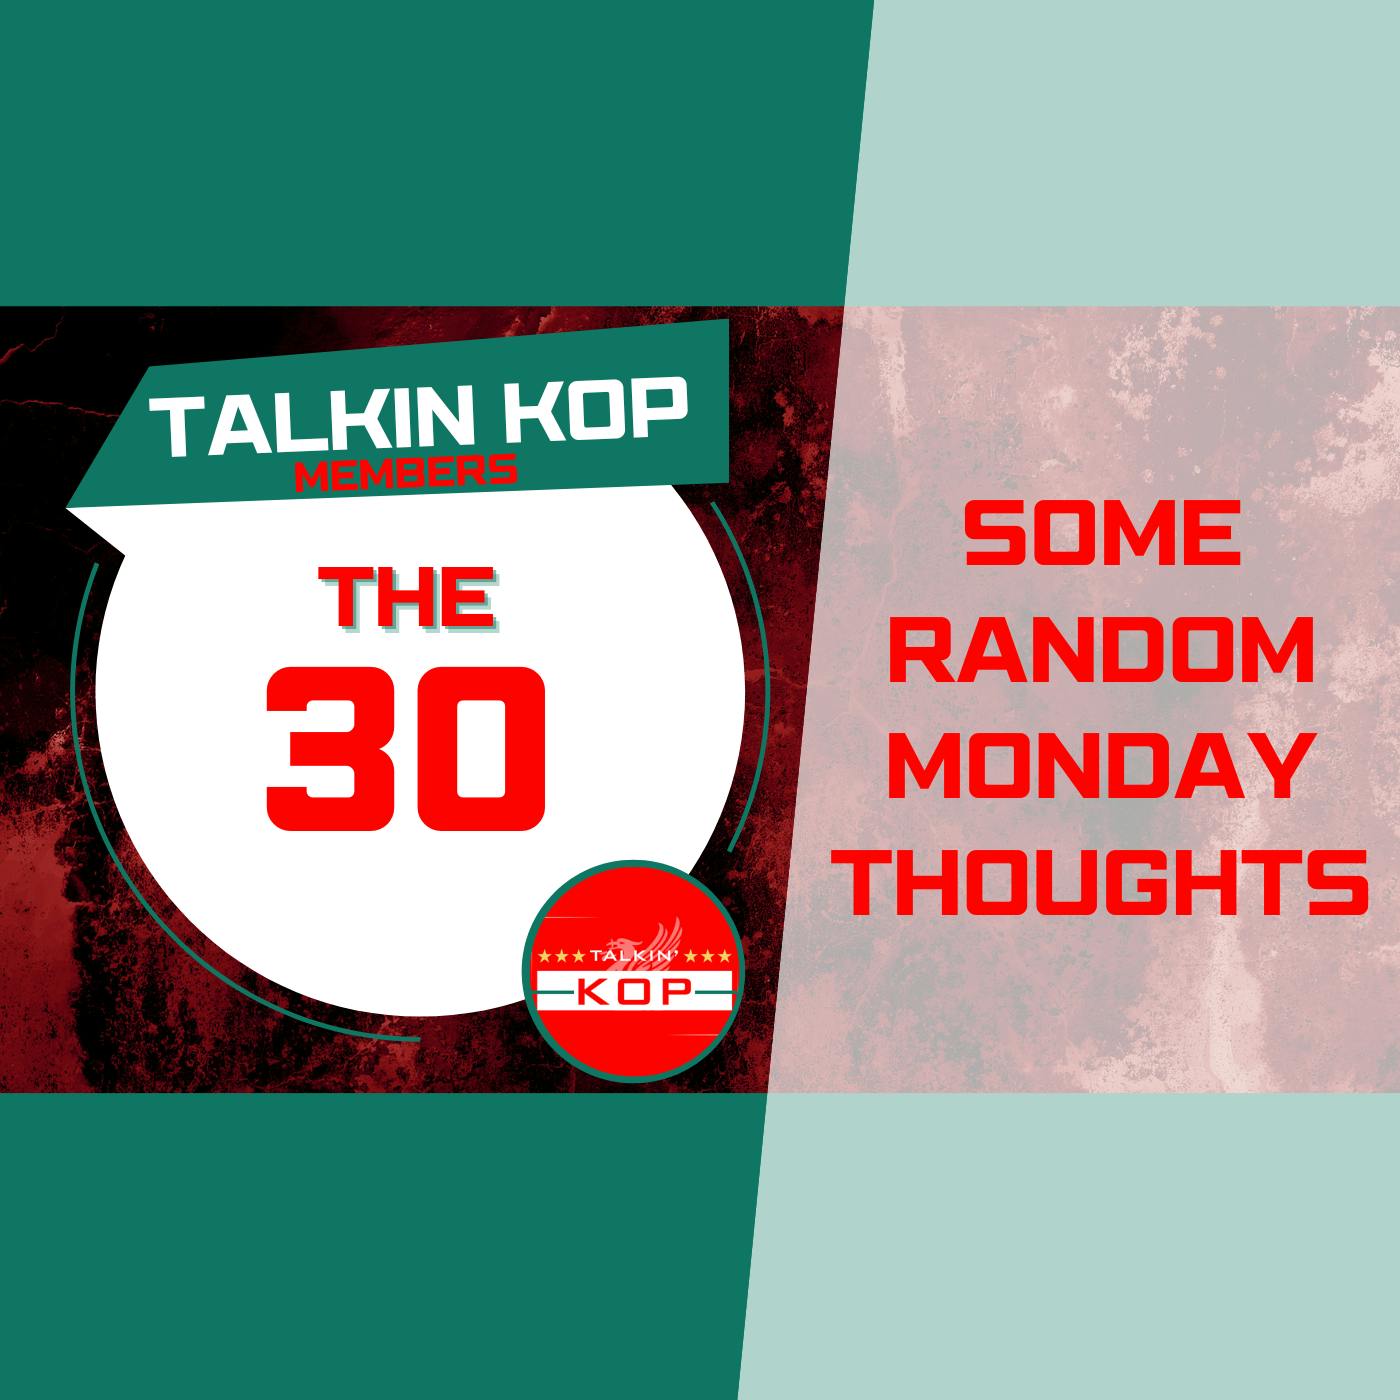 Some Random Monday Thoughts | The 30